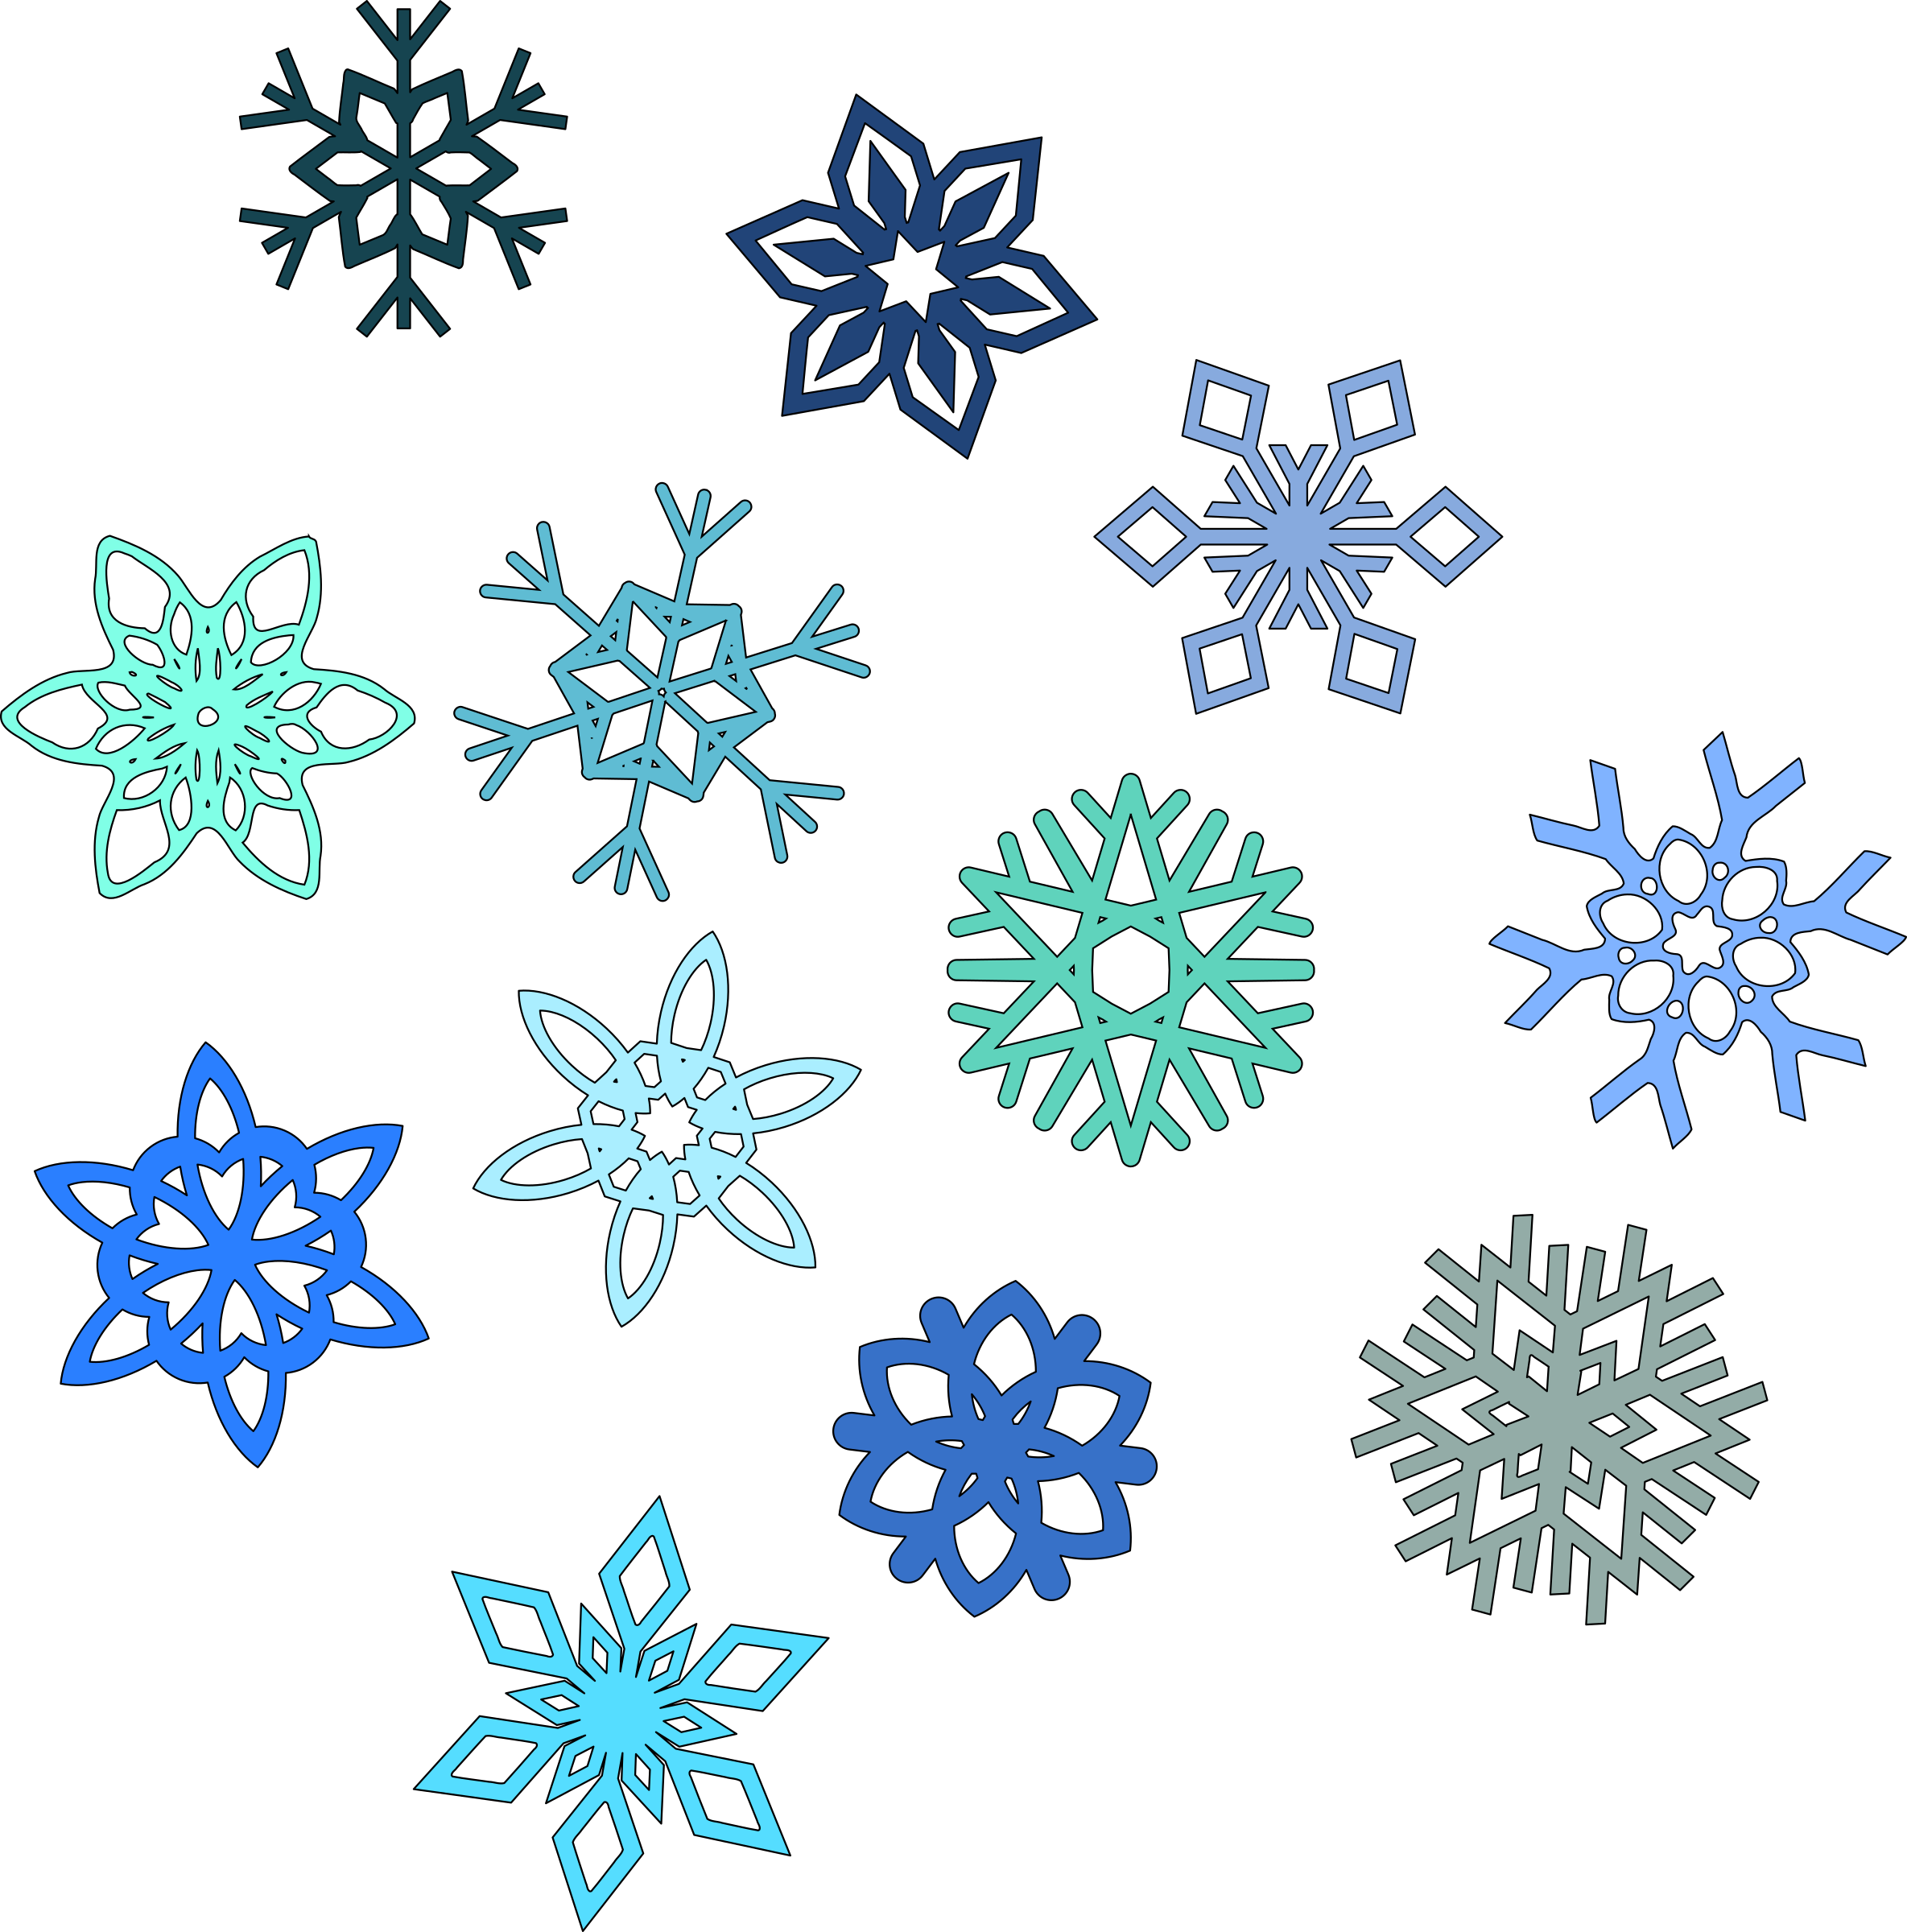 Snowflakes, Snow and Journals